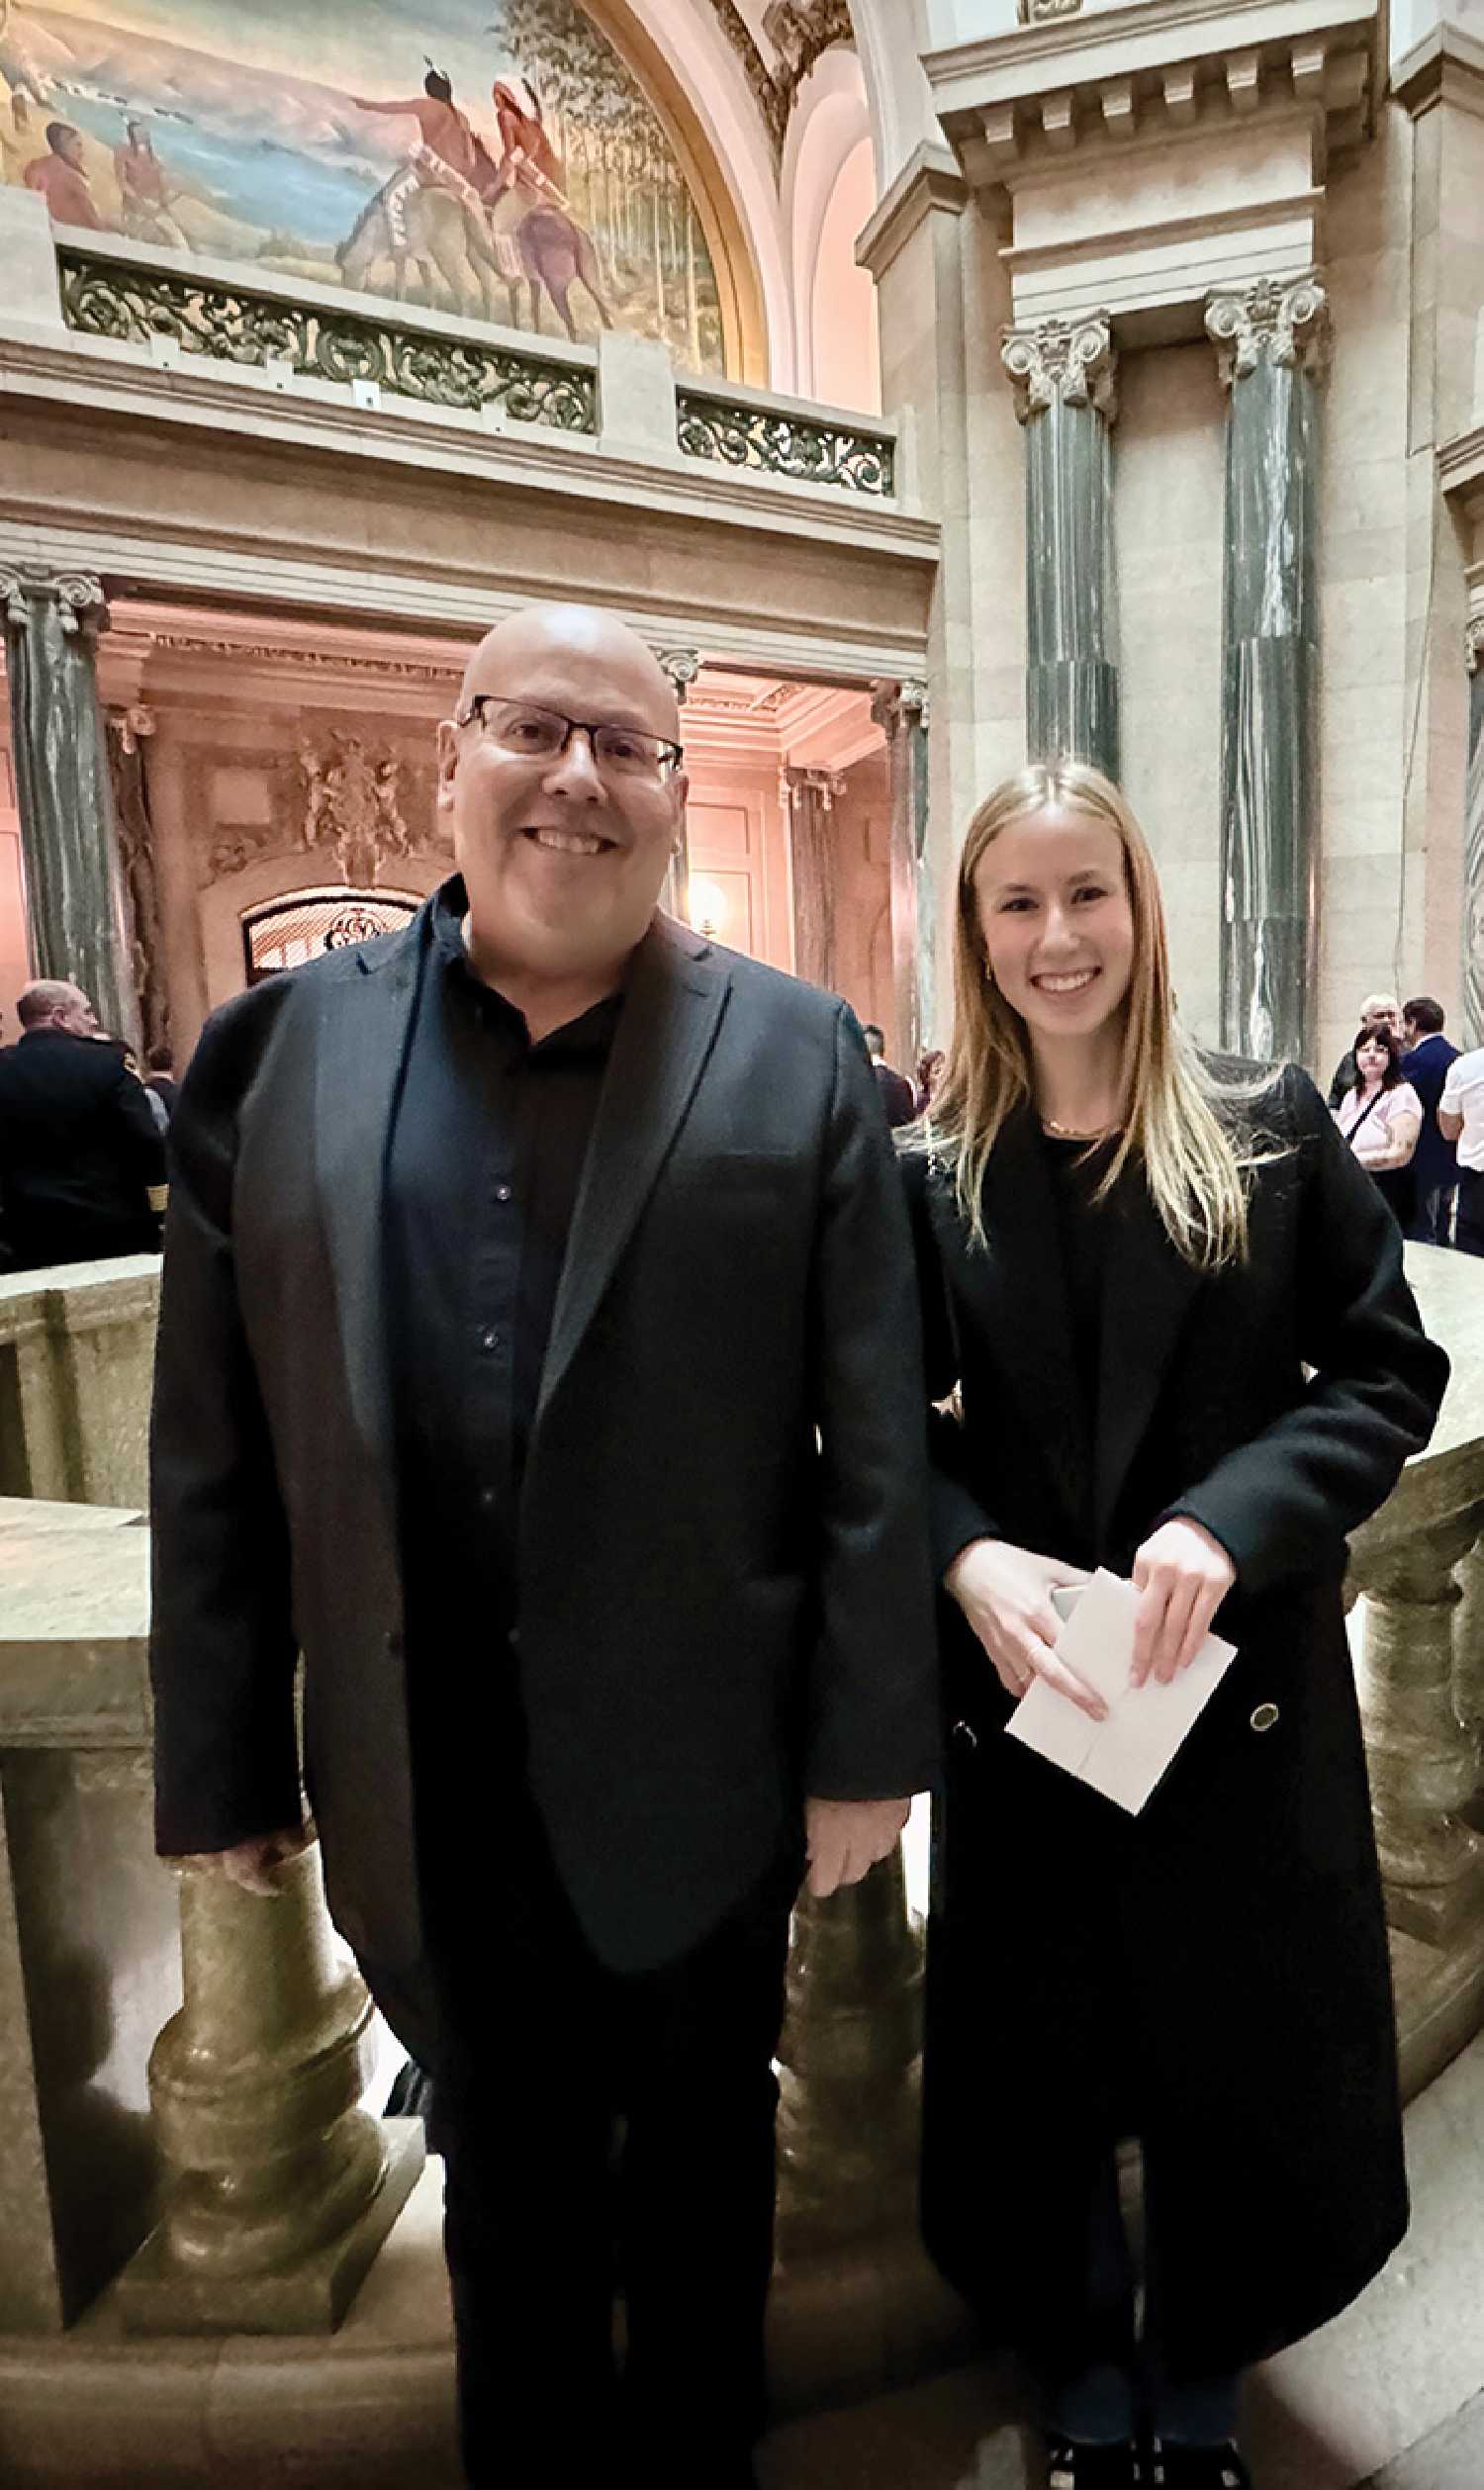 The World-Spectator was represented at the budget speech at the Legislature by Kevin Weedmark and Ashley Bochek.